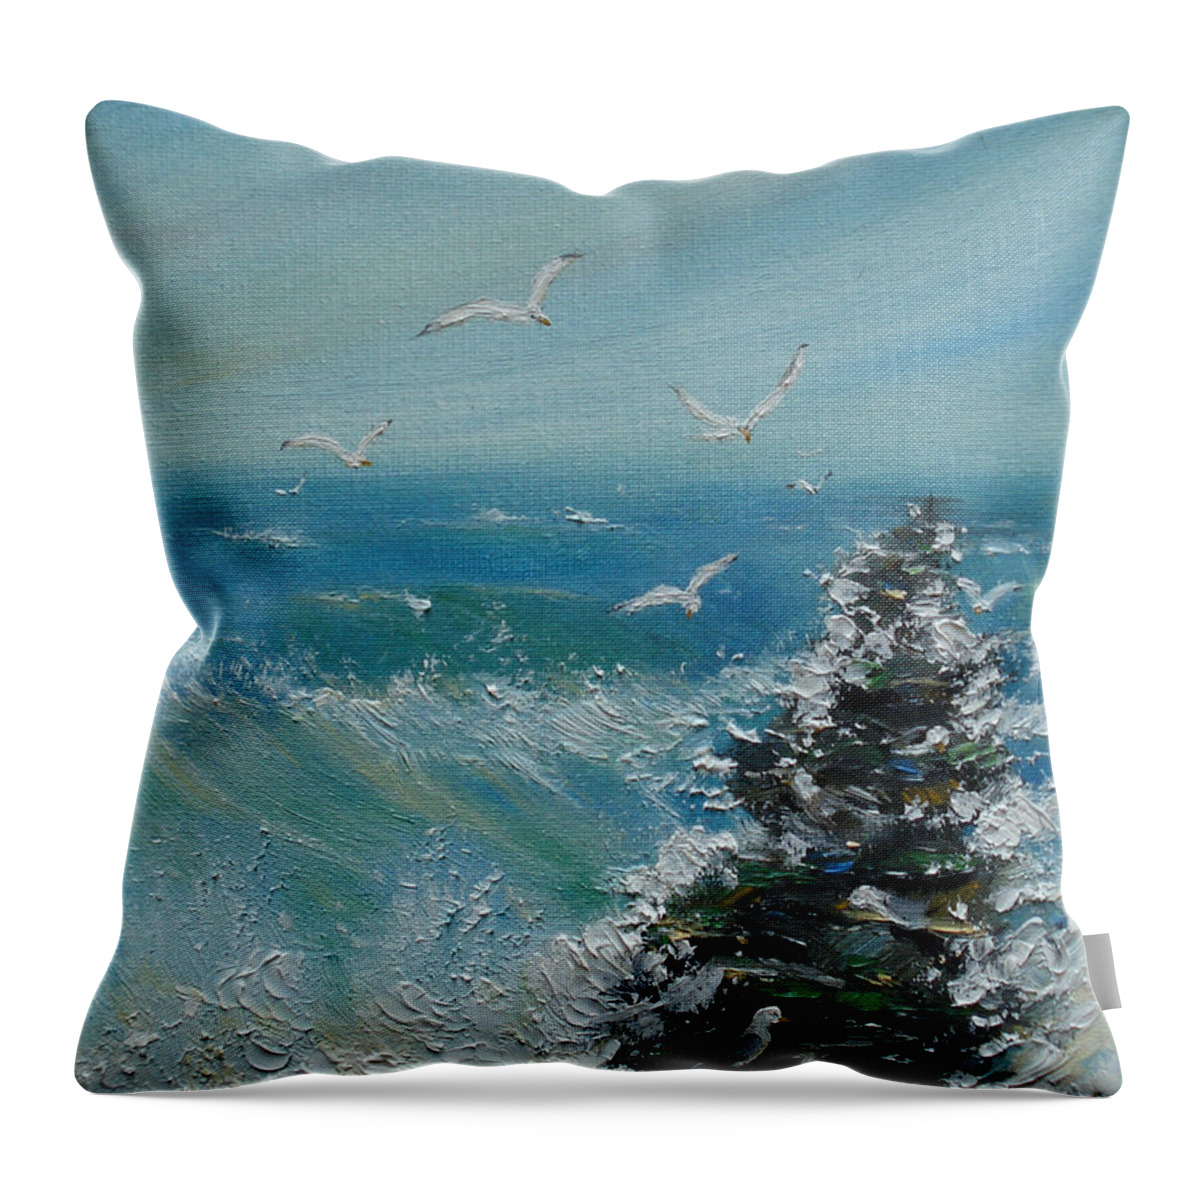 Seagulls Throw Pillow featuring the painting Stalwart Seagulls by Judith Rhue